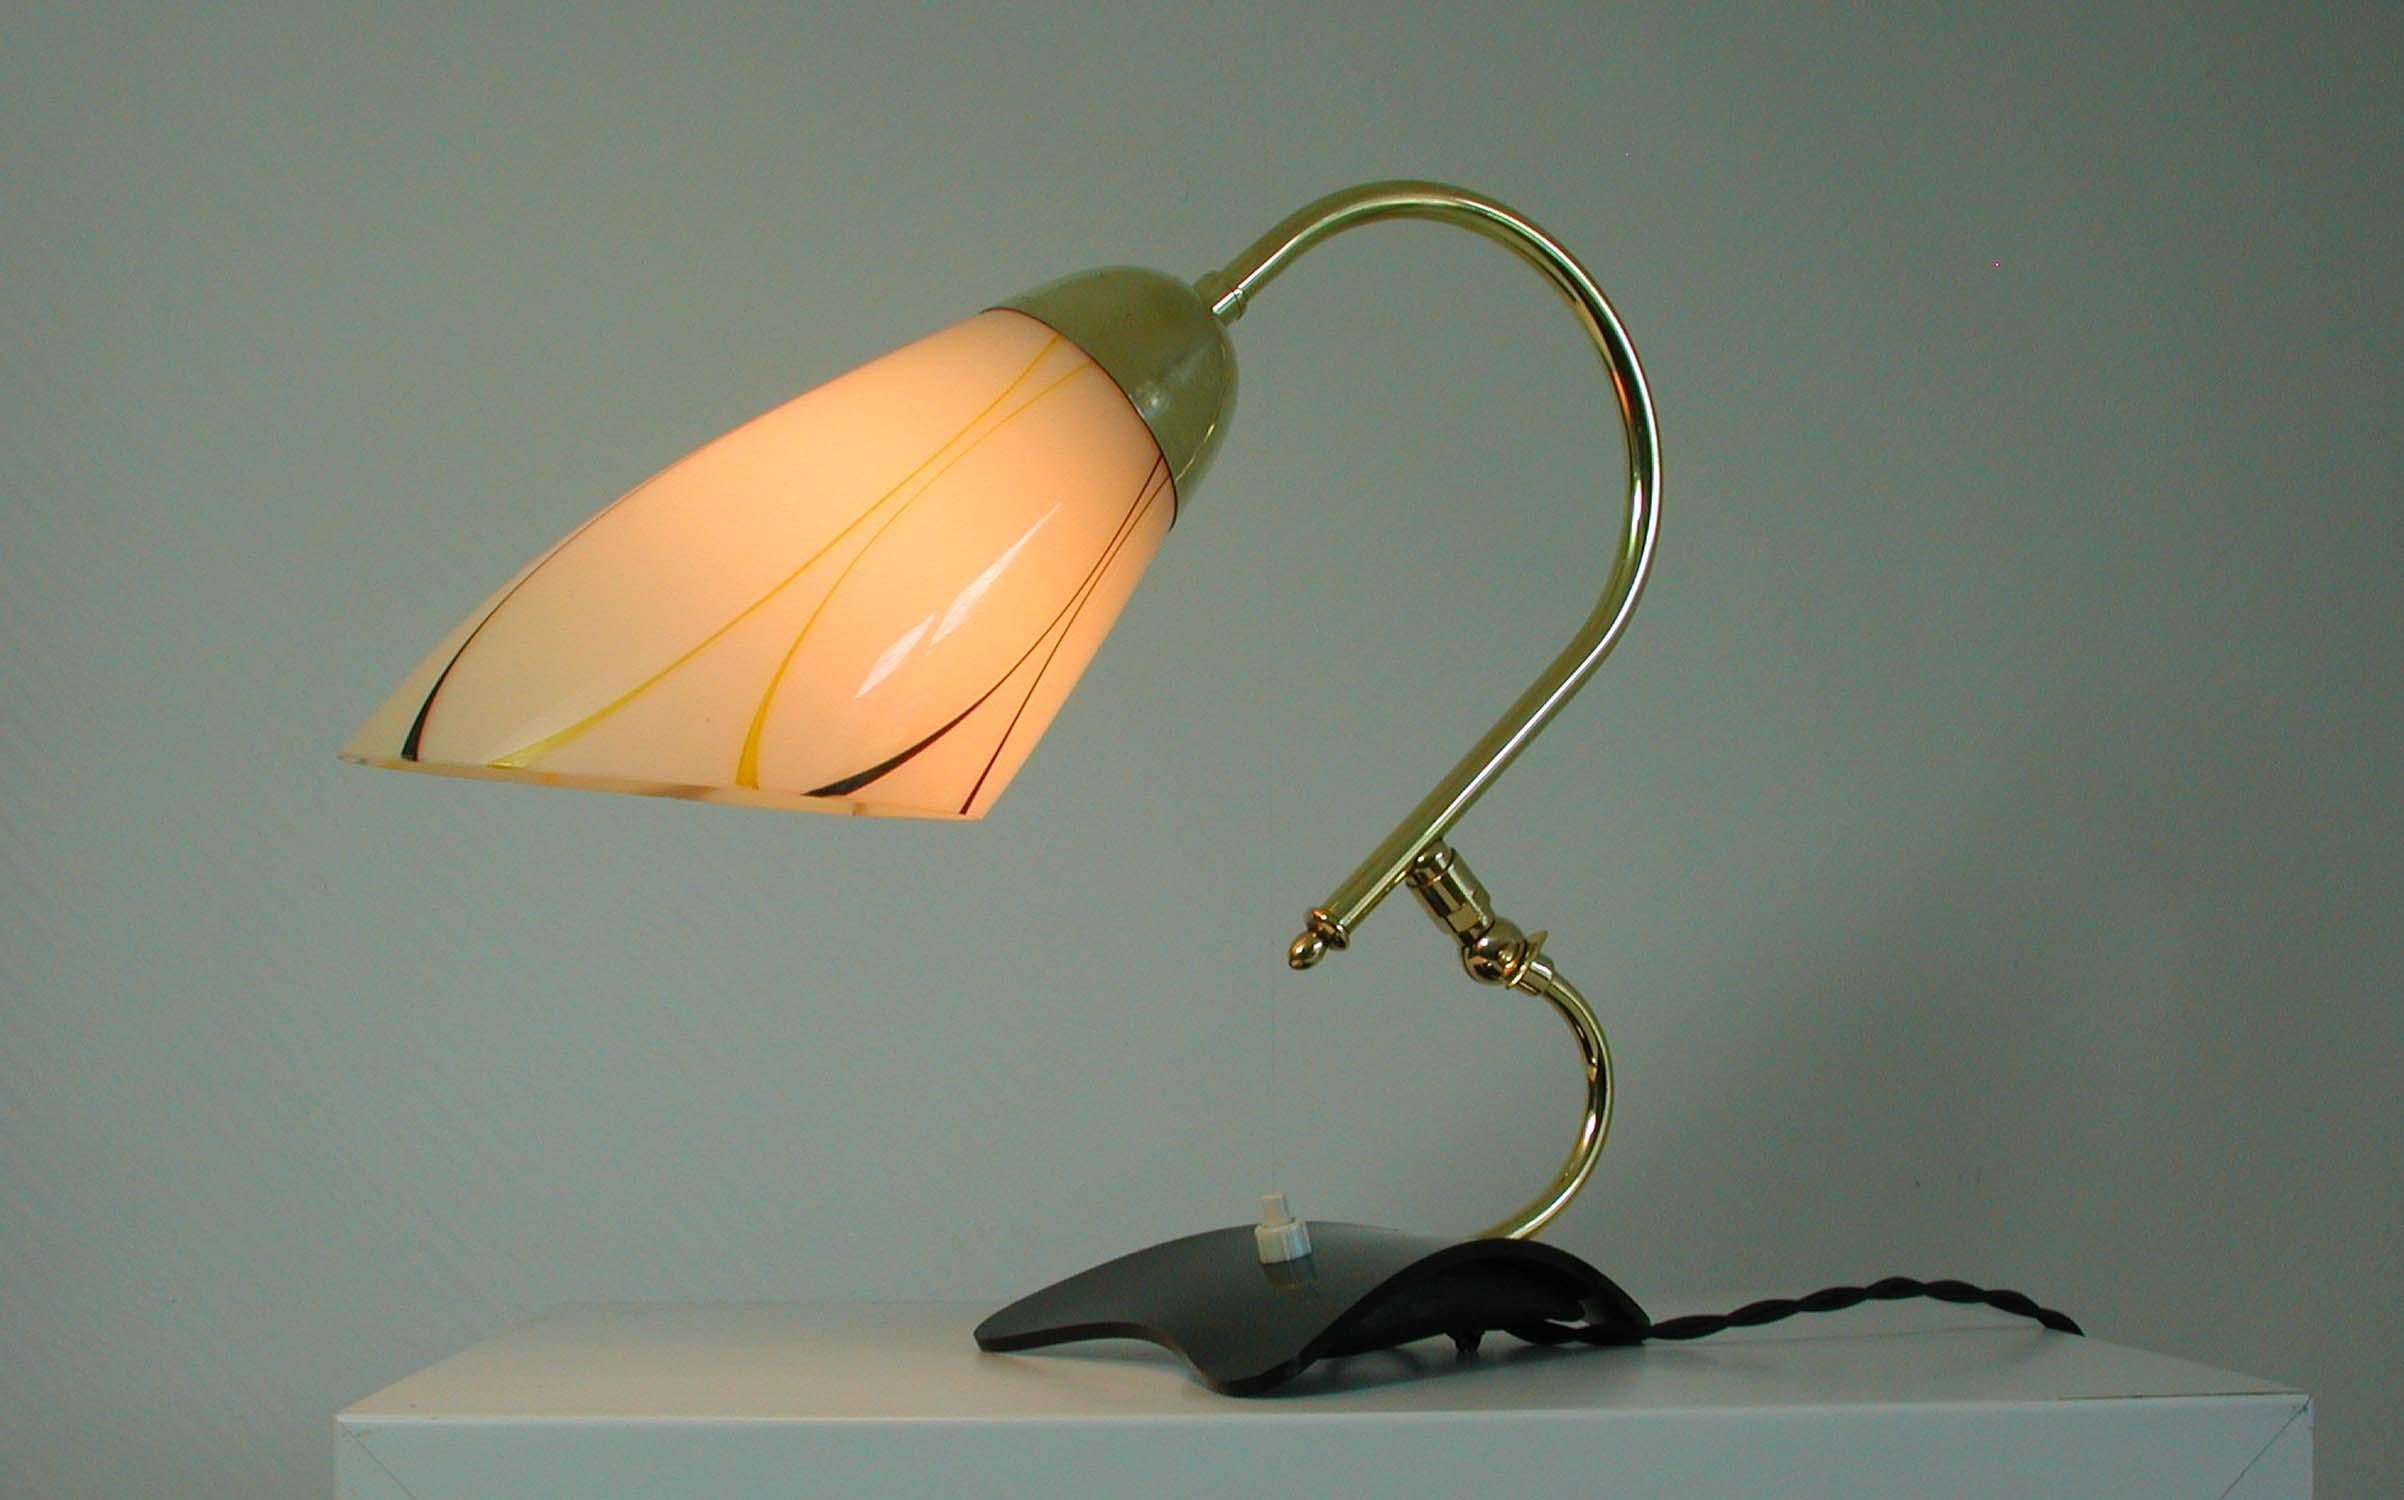 German Midcentury Adjustable Yellow, Black and White Table Lamp, 1950s For Sale 3